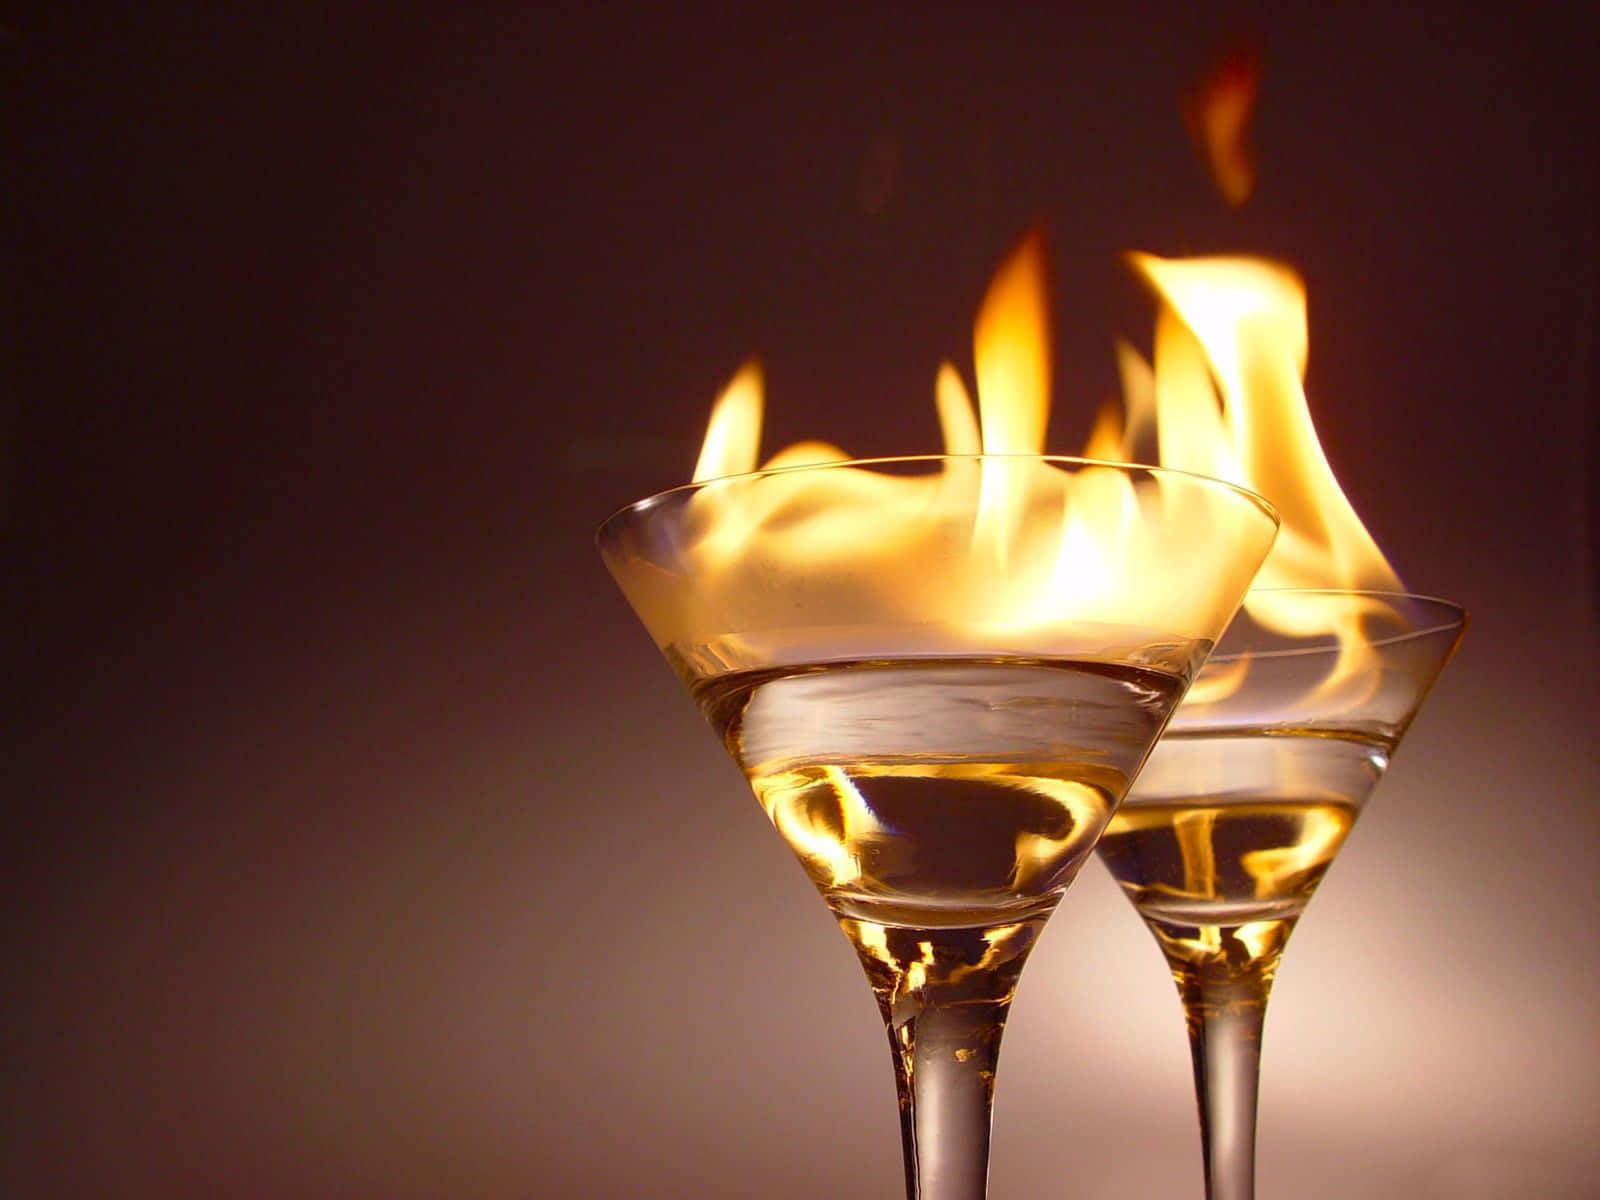 Wine Glasses Drinks With Fire Wallpaper